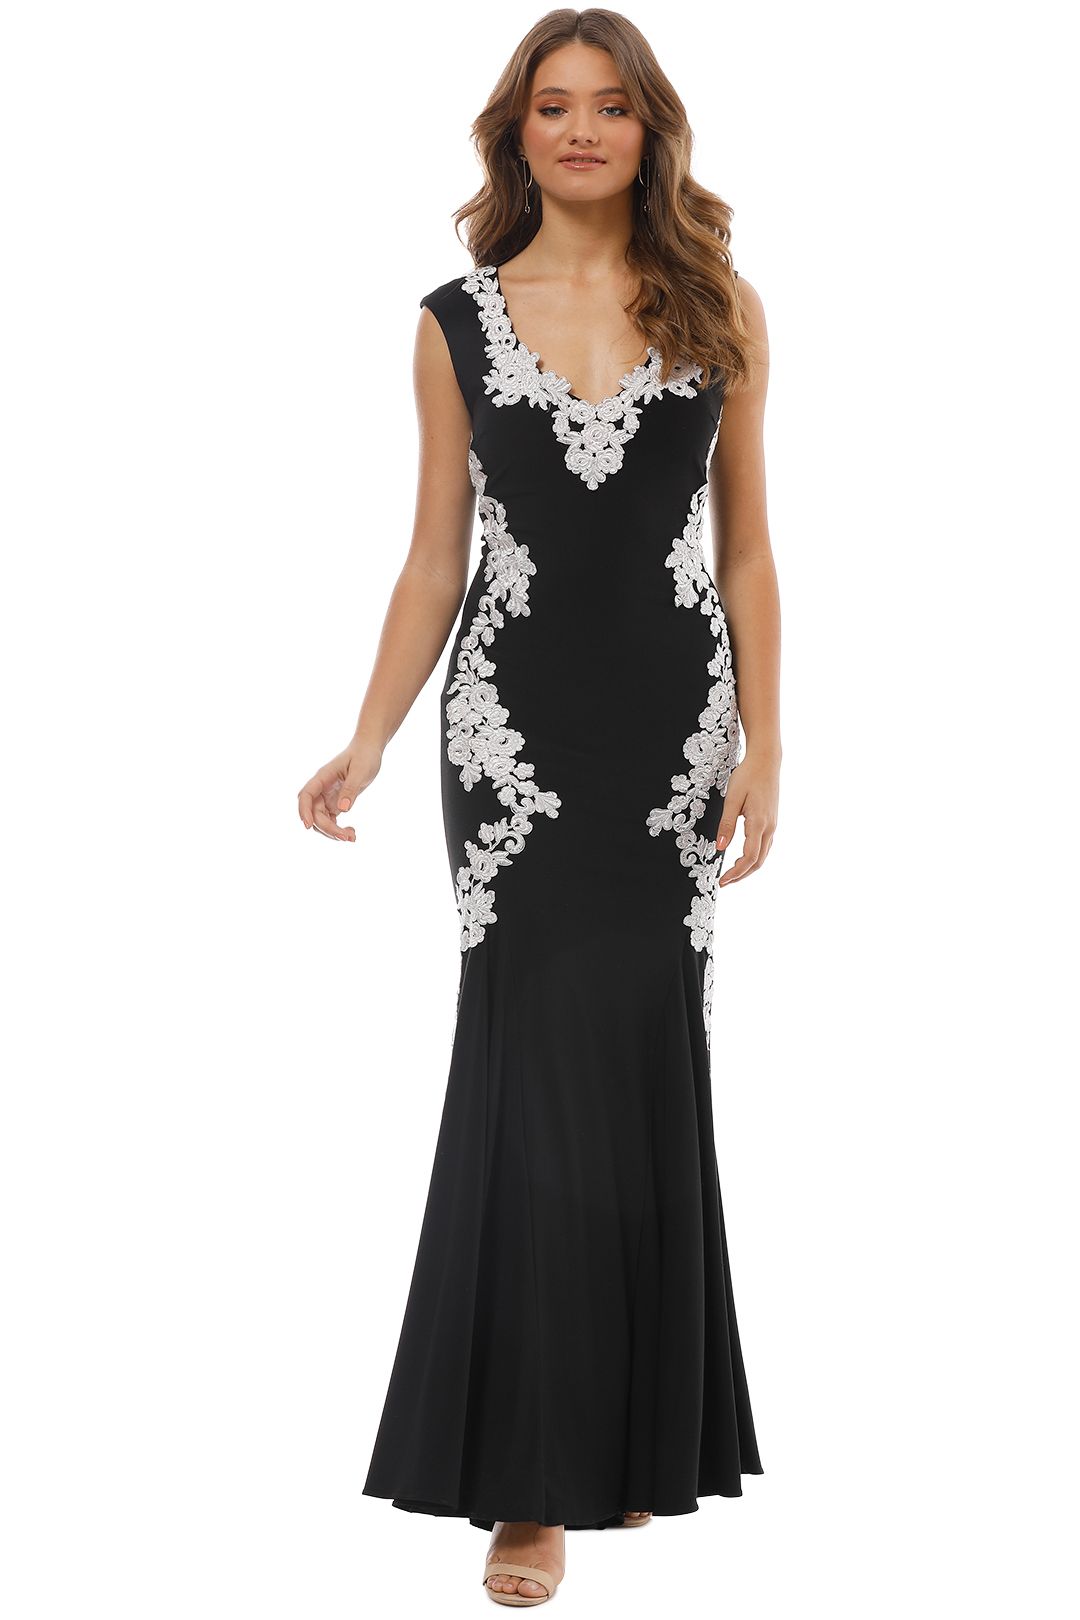 Montique - Ava Embroidered Gown - Black - Front